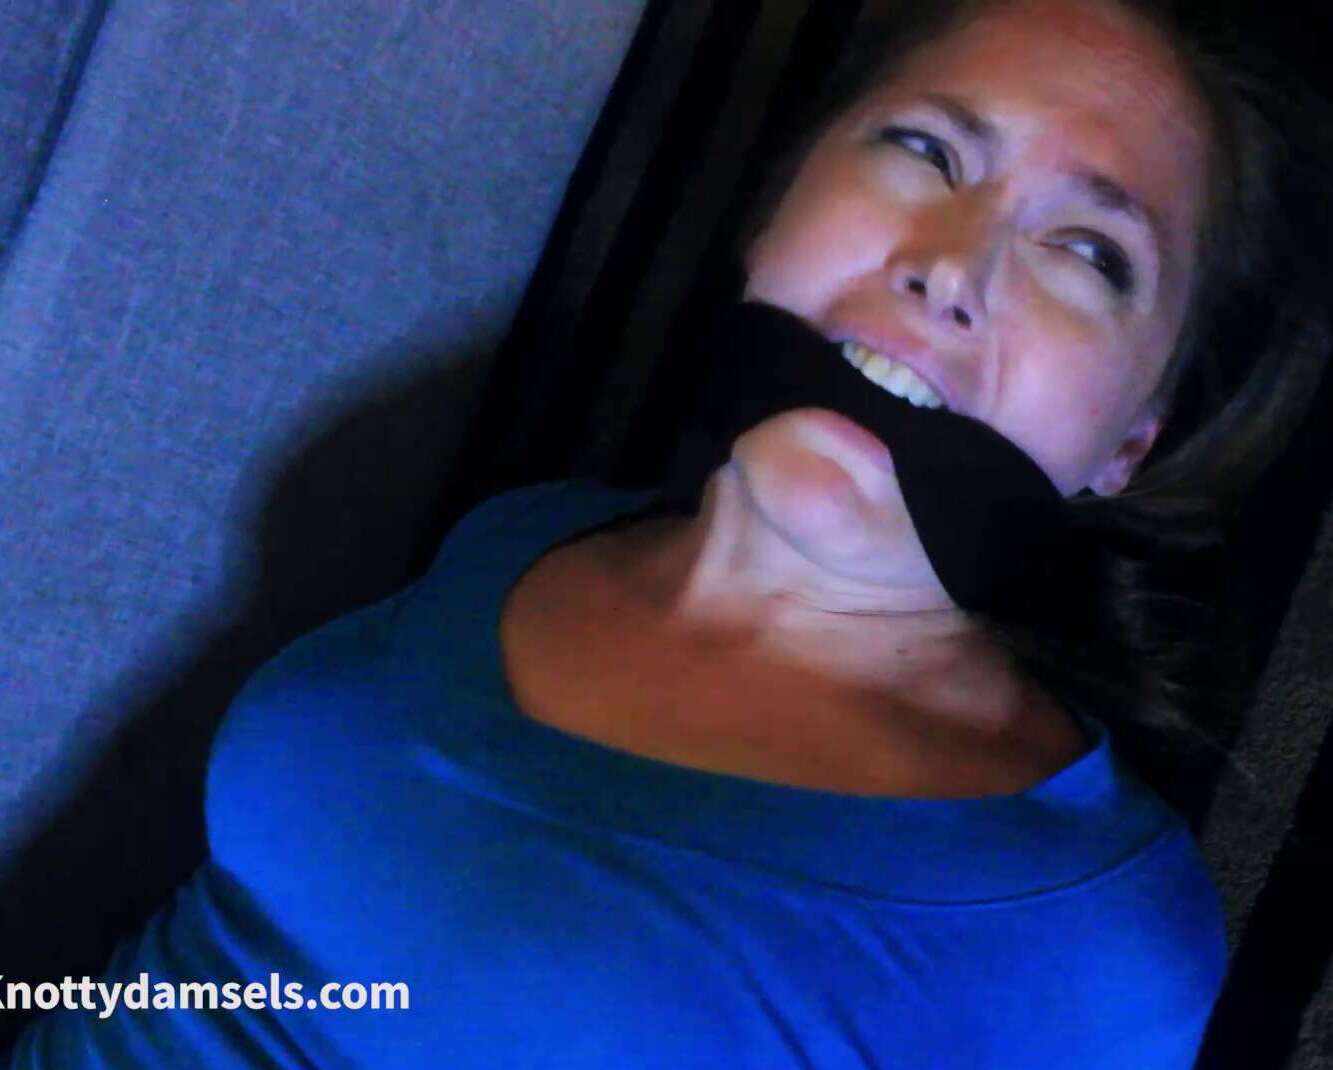 Rachel Adams is tightly cleave gagged - Rachel Adams: Couchbound and Cleaved - Knottydamsels